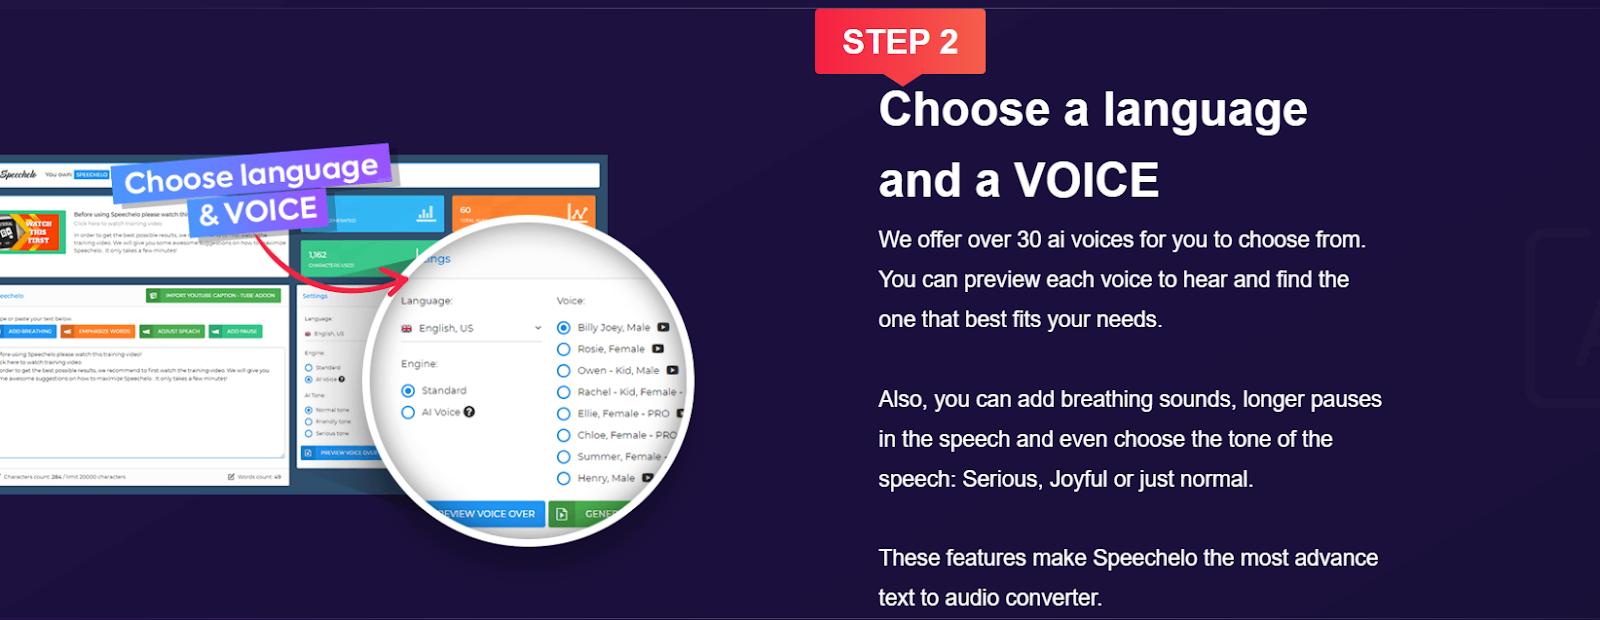 Step 2: Choose A Language And A Voice